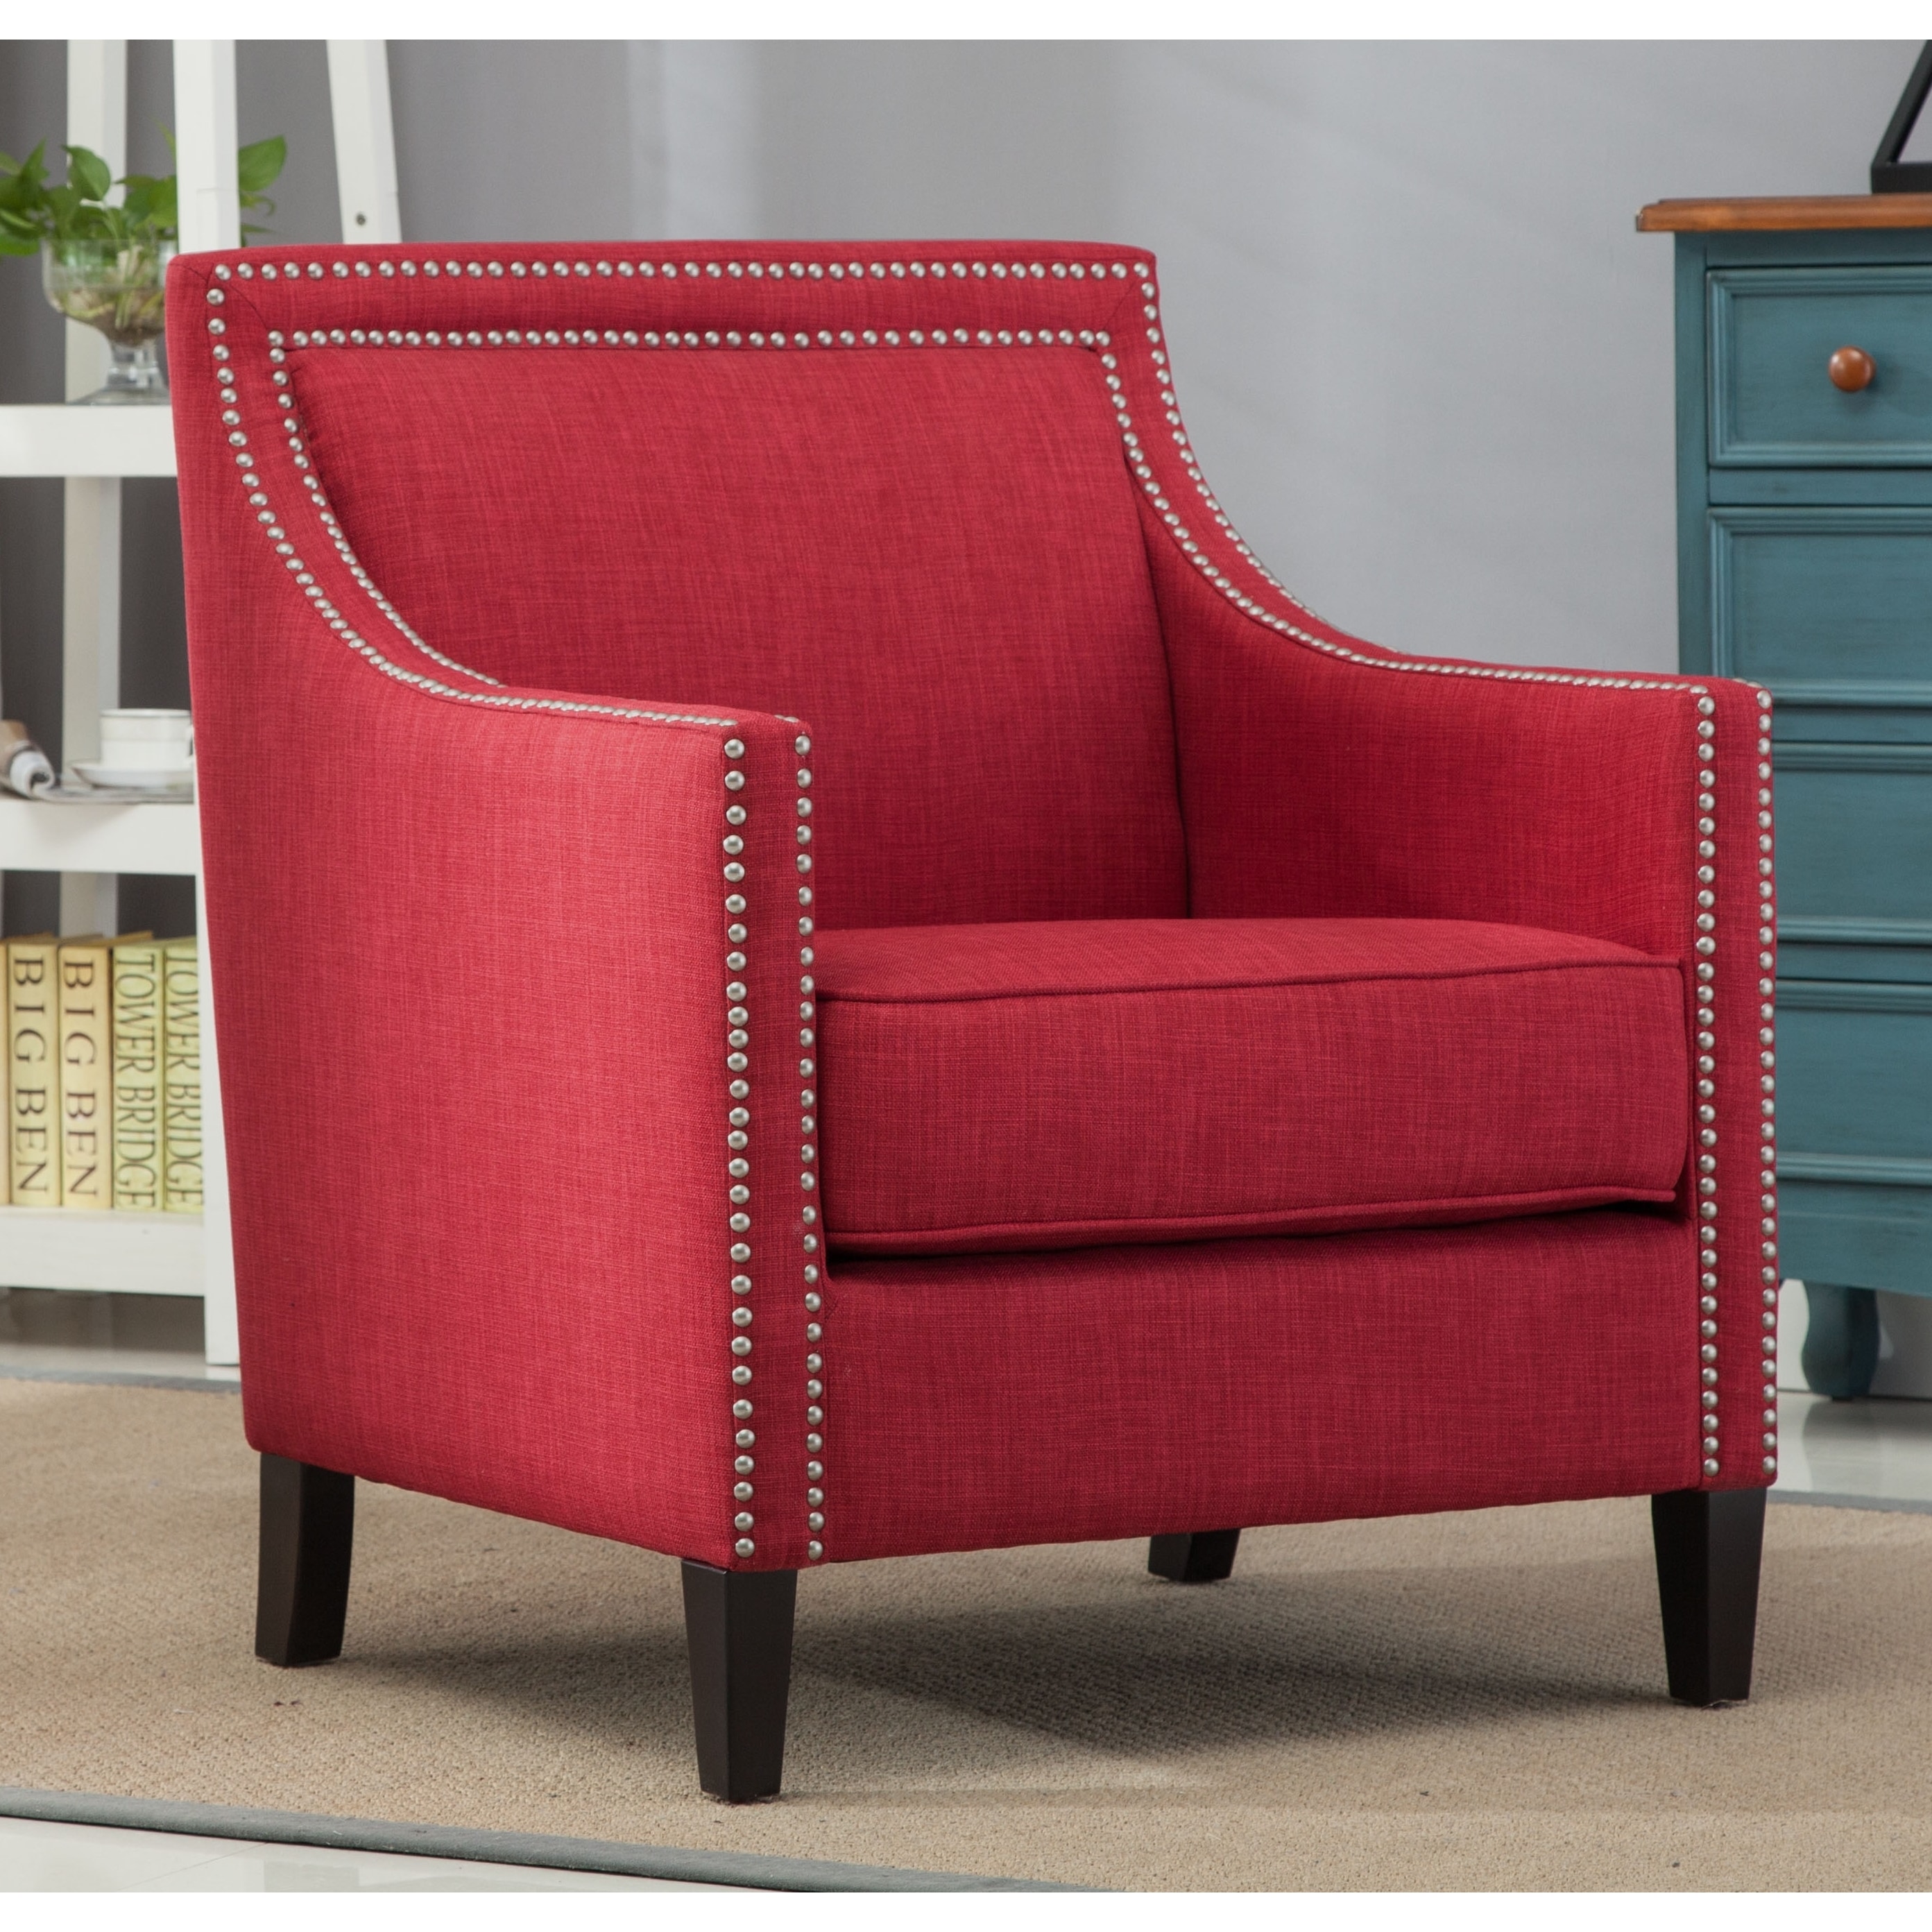 Shop Copper Grove Birkenfeld Red Accent Chair See Product Description Overstock 22580985